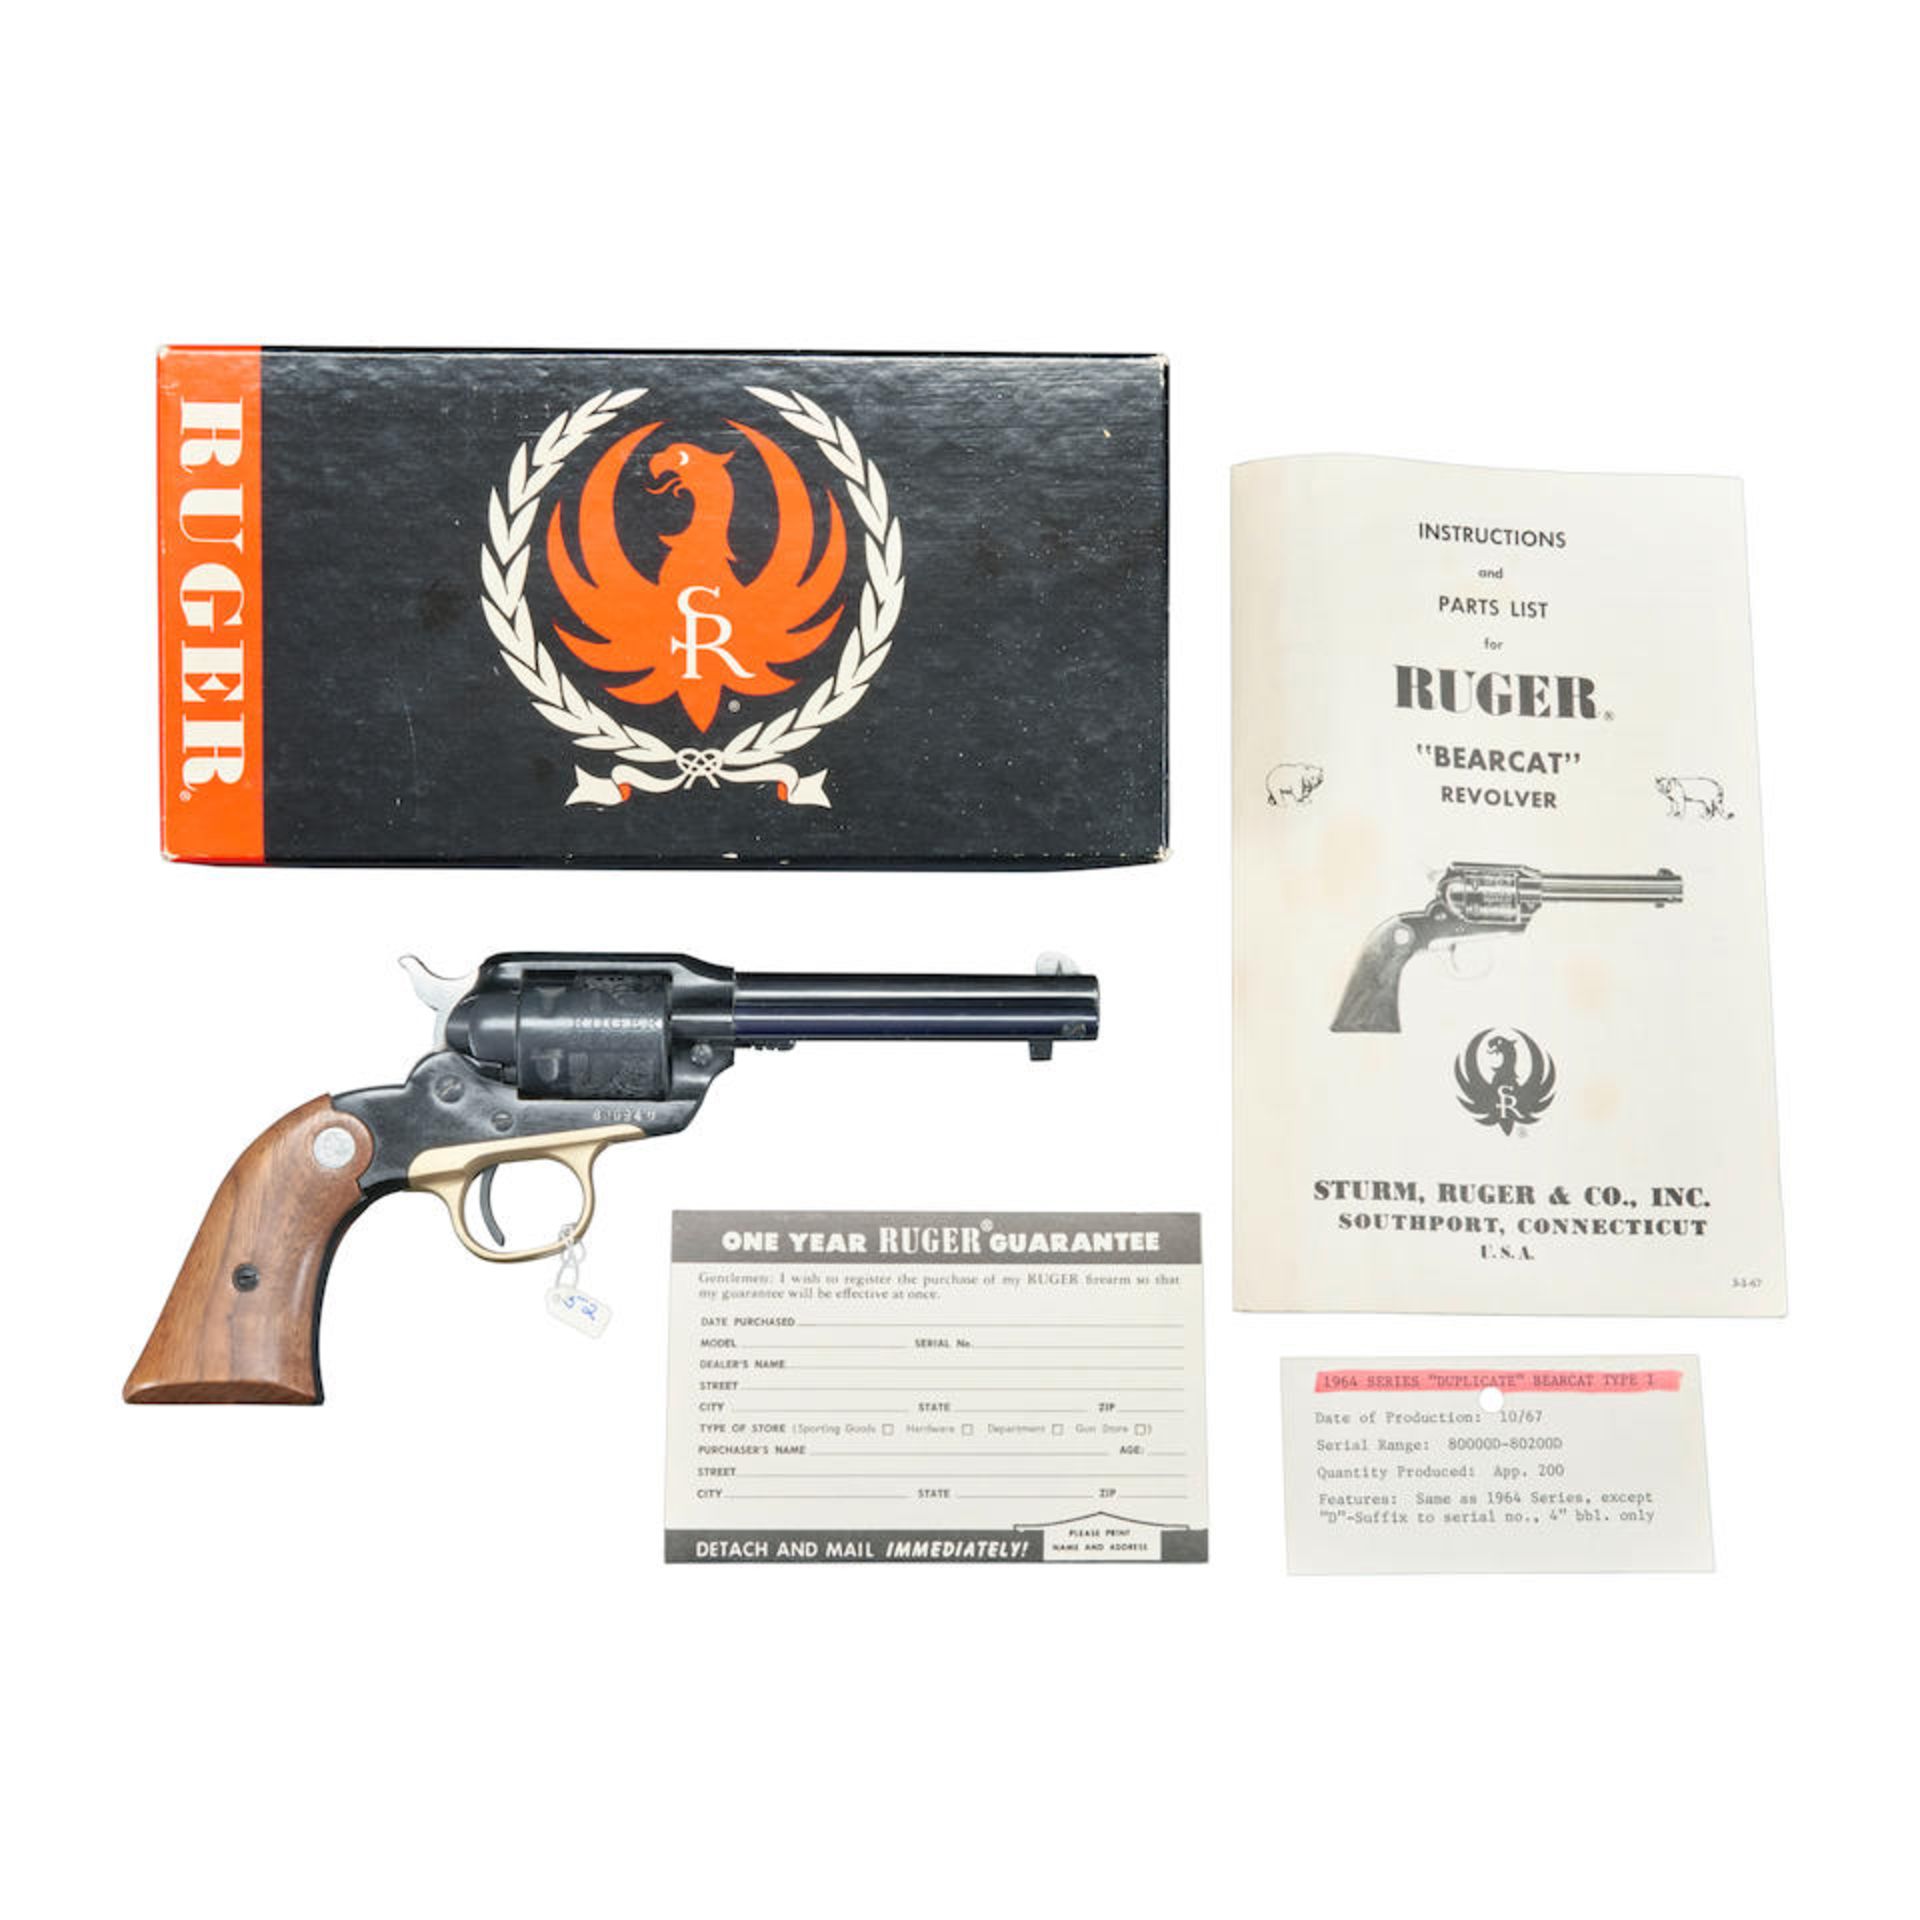 Ruger Bearcat Duplicate Serial Number Single Action Revolver, Curio or Relic firearm